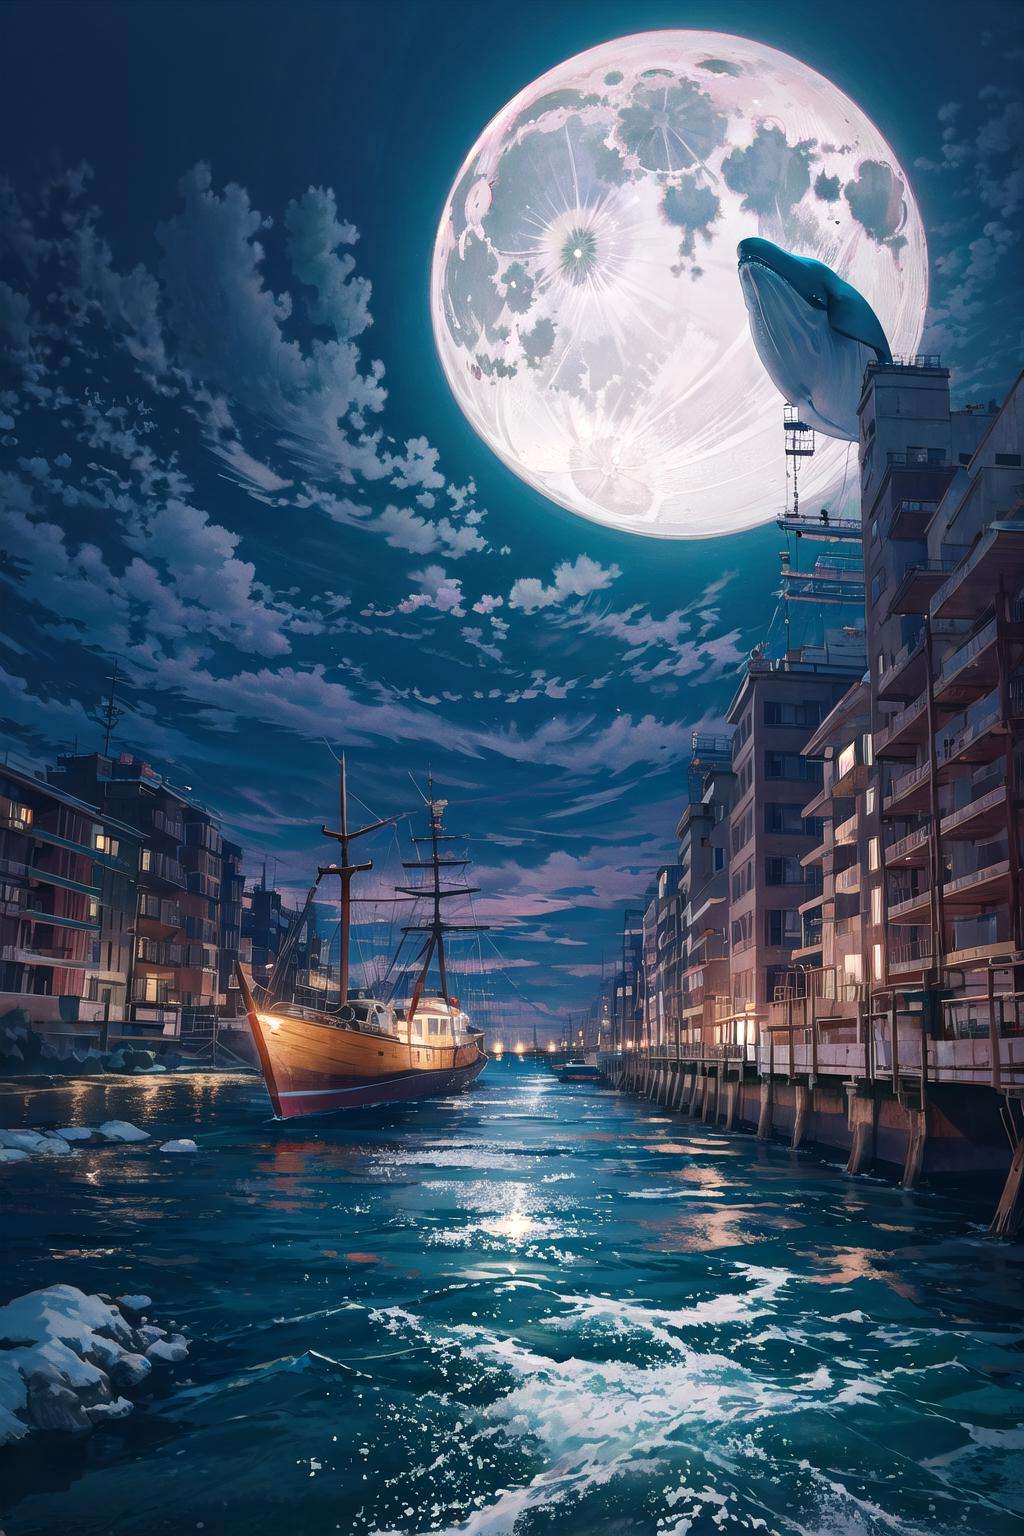 octans, no humans, moon, sky, night, full moon, cloud, whale, outdoors, scenery, night sky, water, watercraft, cloudy sky, building, skeleton, animal.<lora:octans-PYNOISE-LOHA:1>